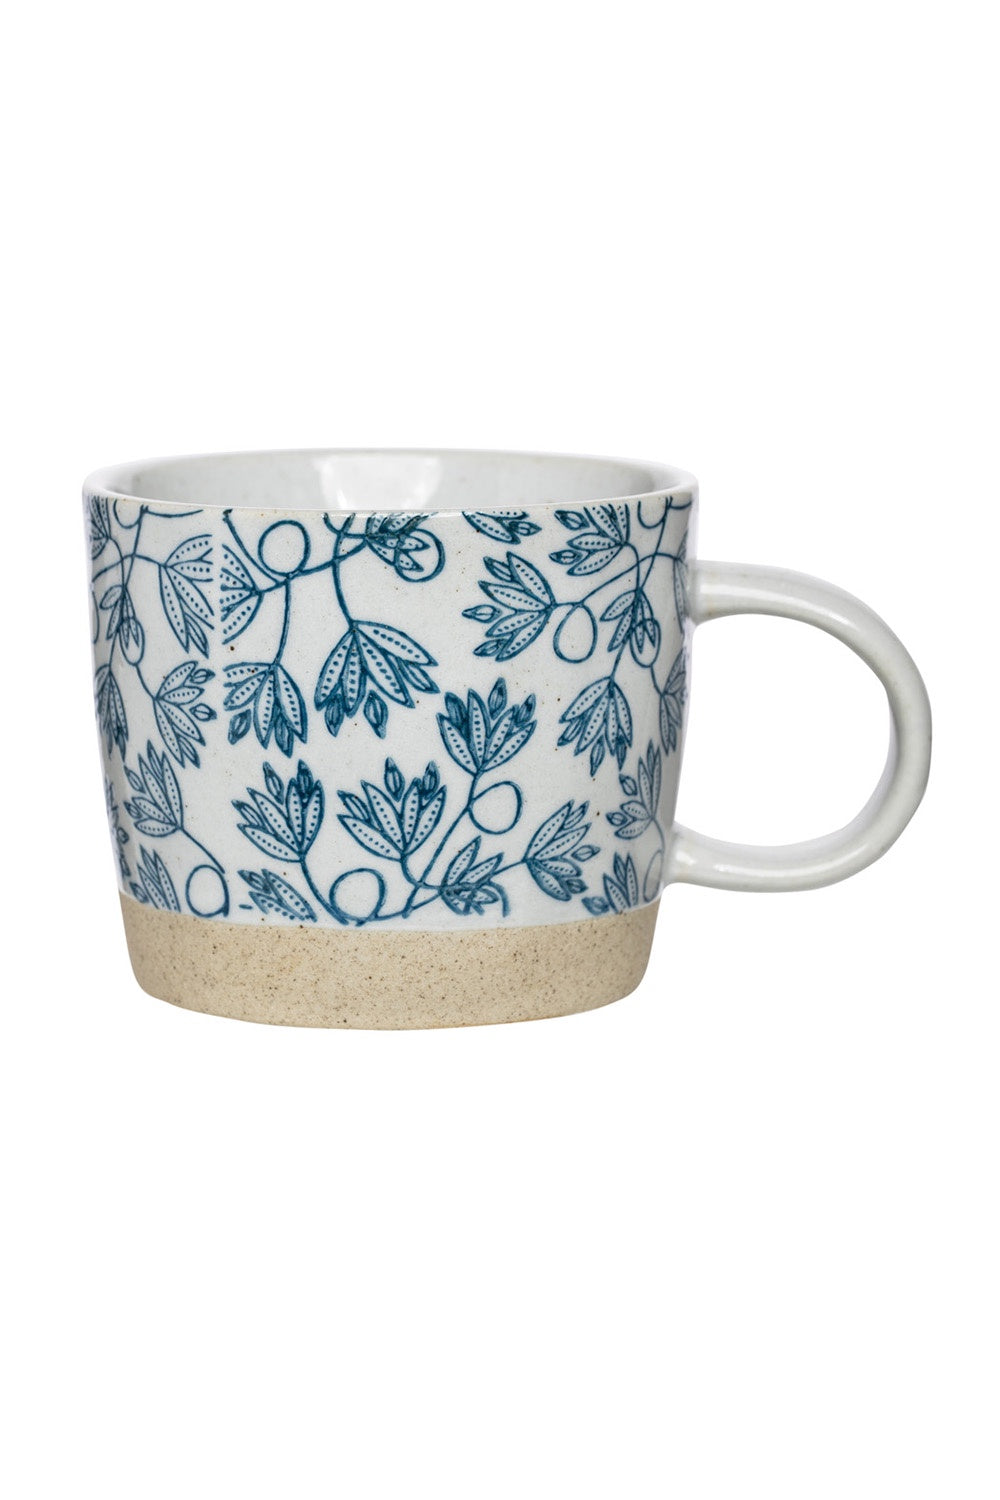 Tranquillo Mug - Rustic Flowers 250 ml-Homeware-Ohh! By Gum - Shop Sustainable